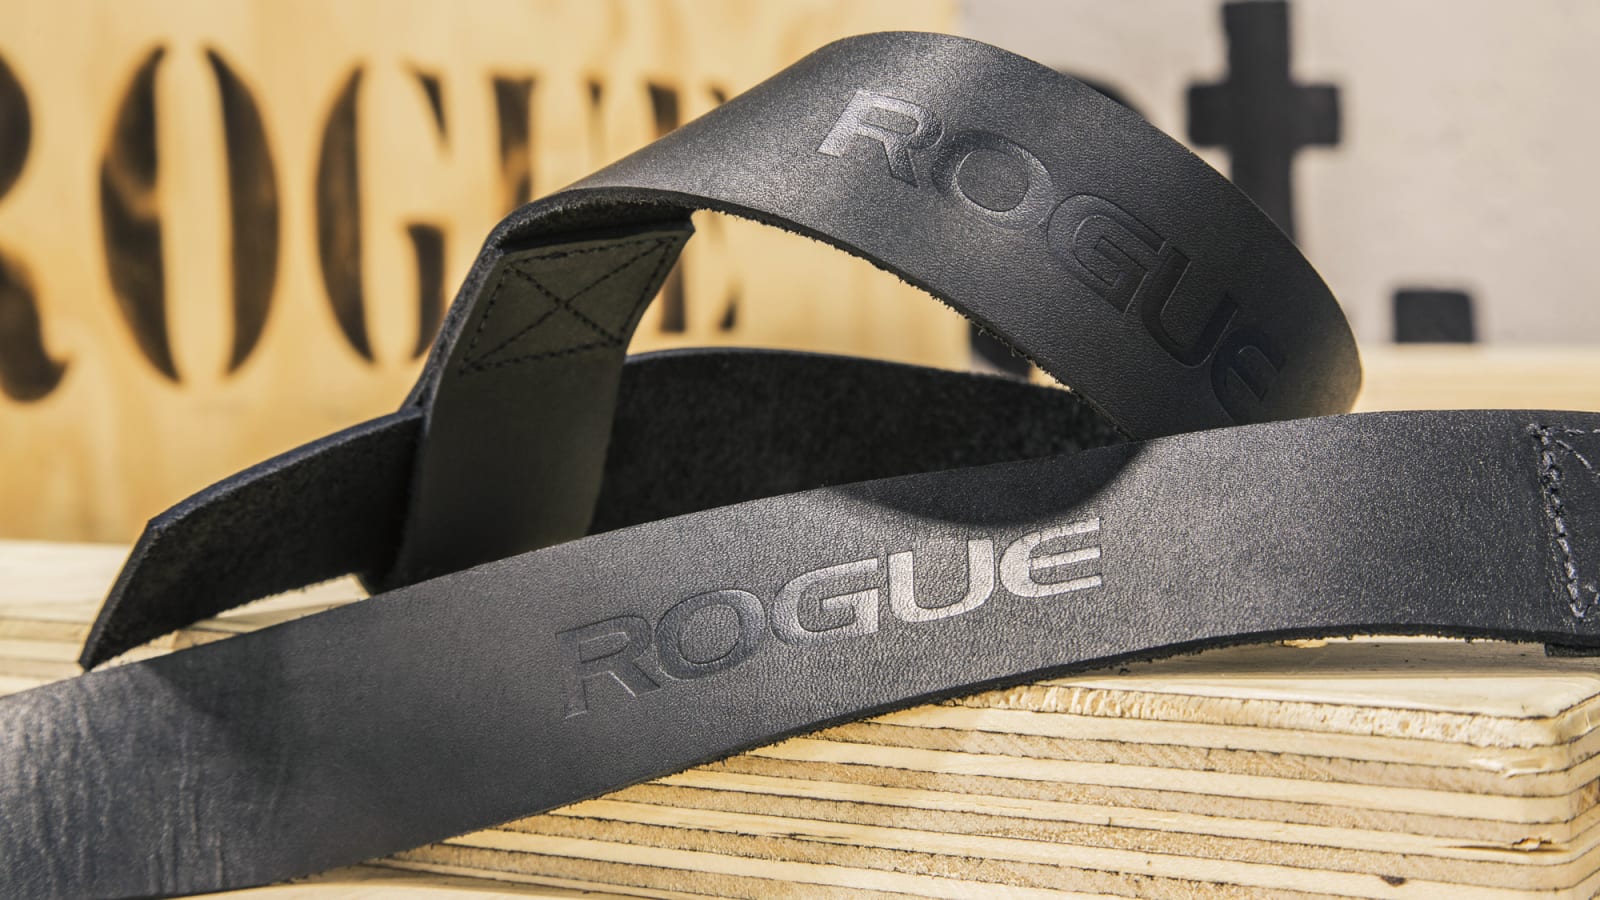 Rogue Treated Leather Straps